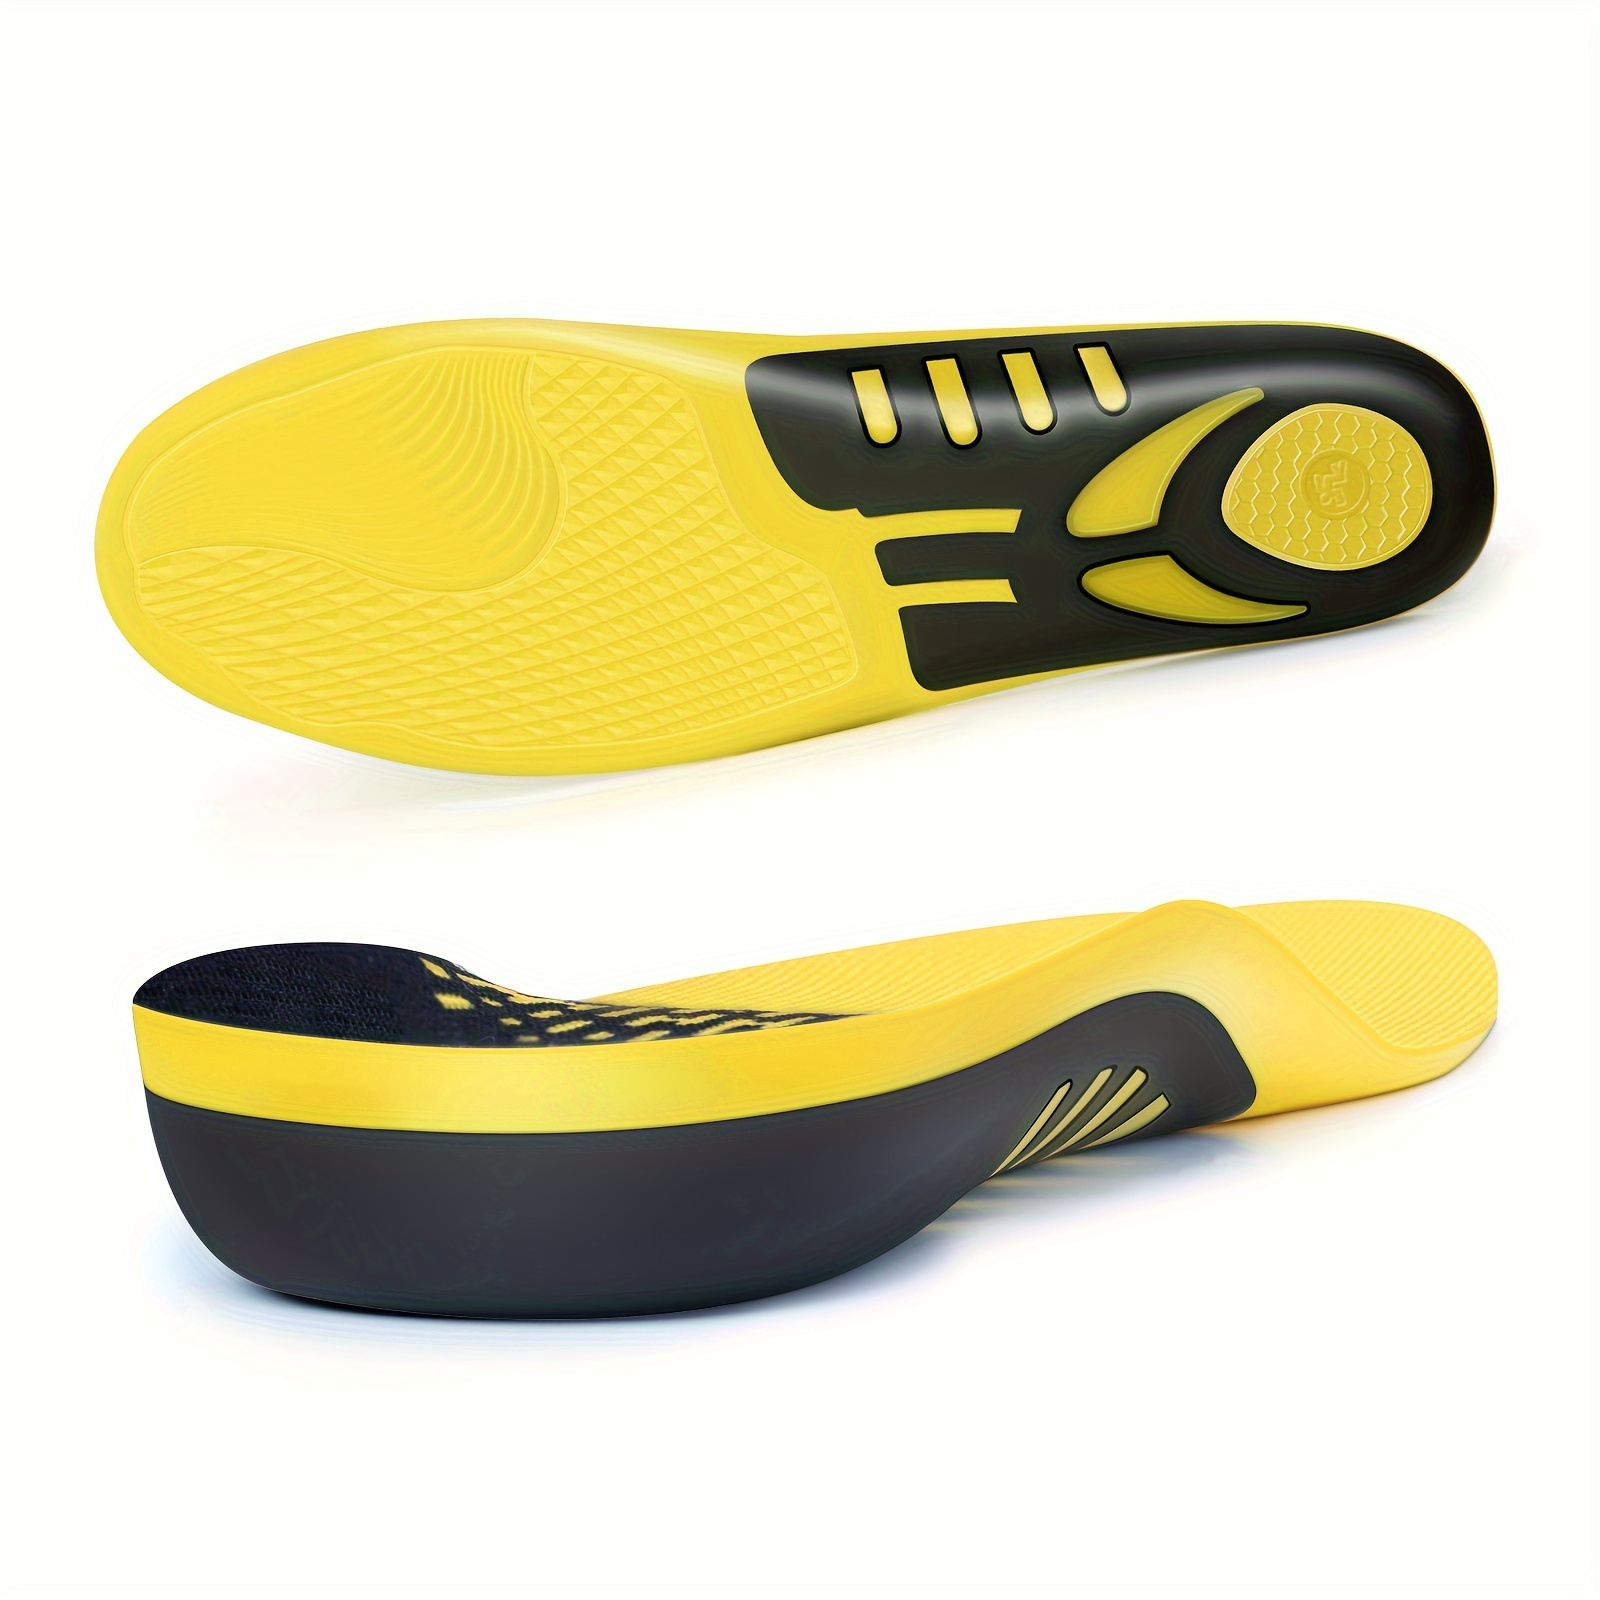 

Arch Support Unisex Inserts For Work, Sports, And Daily Comfort, Supports 220+ Pounds